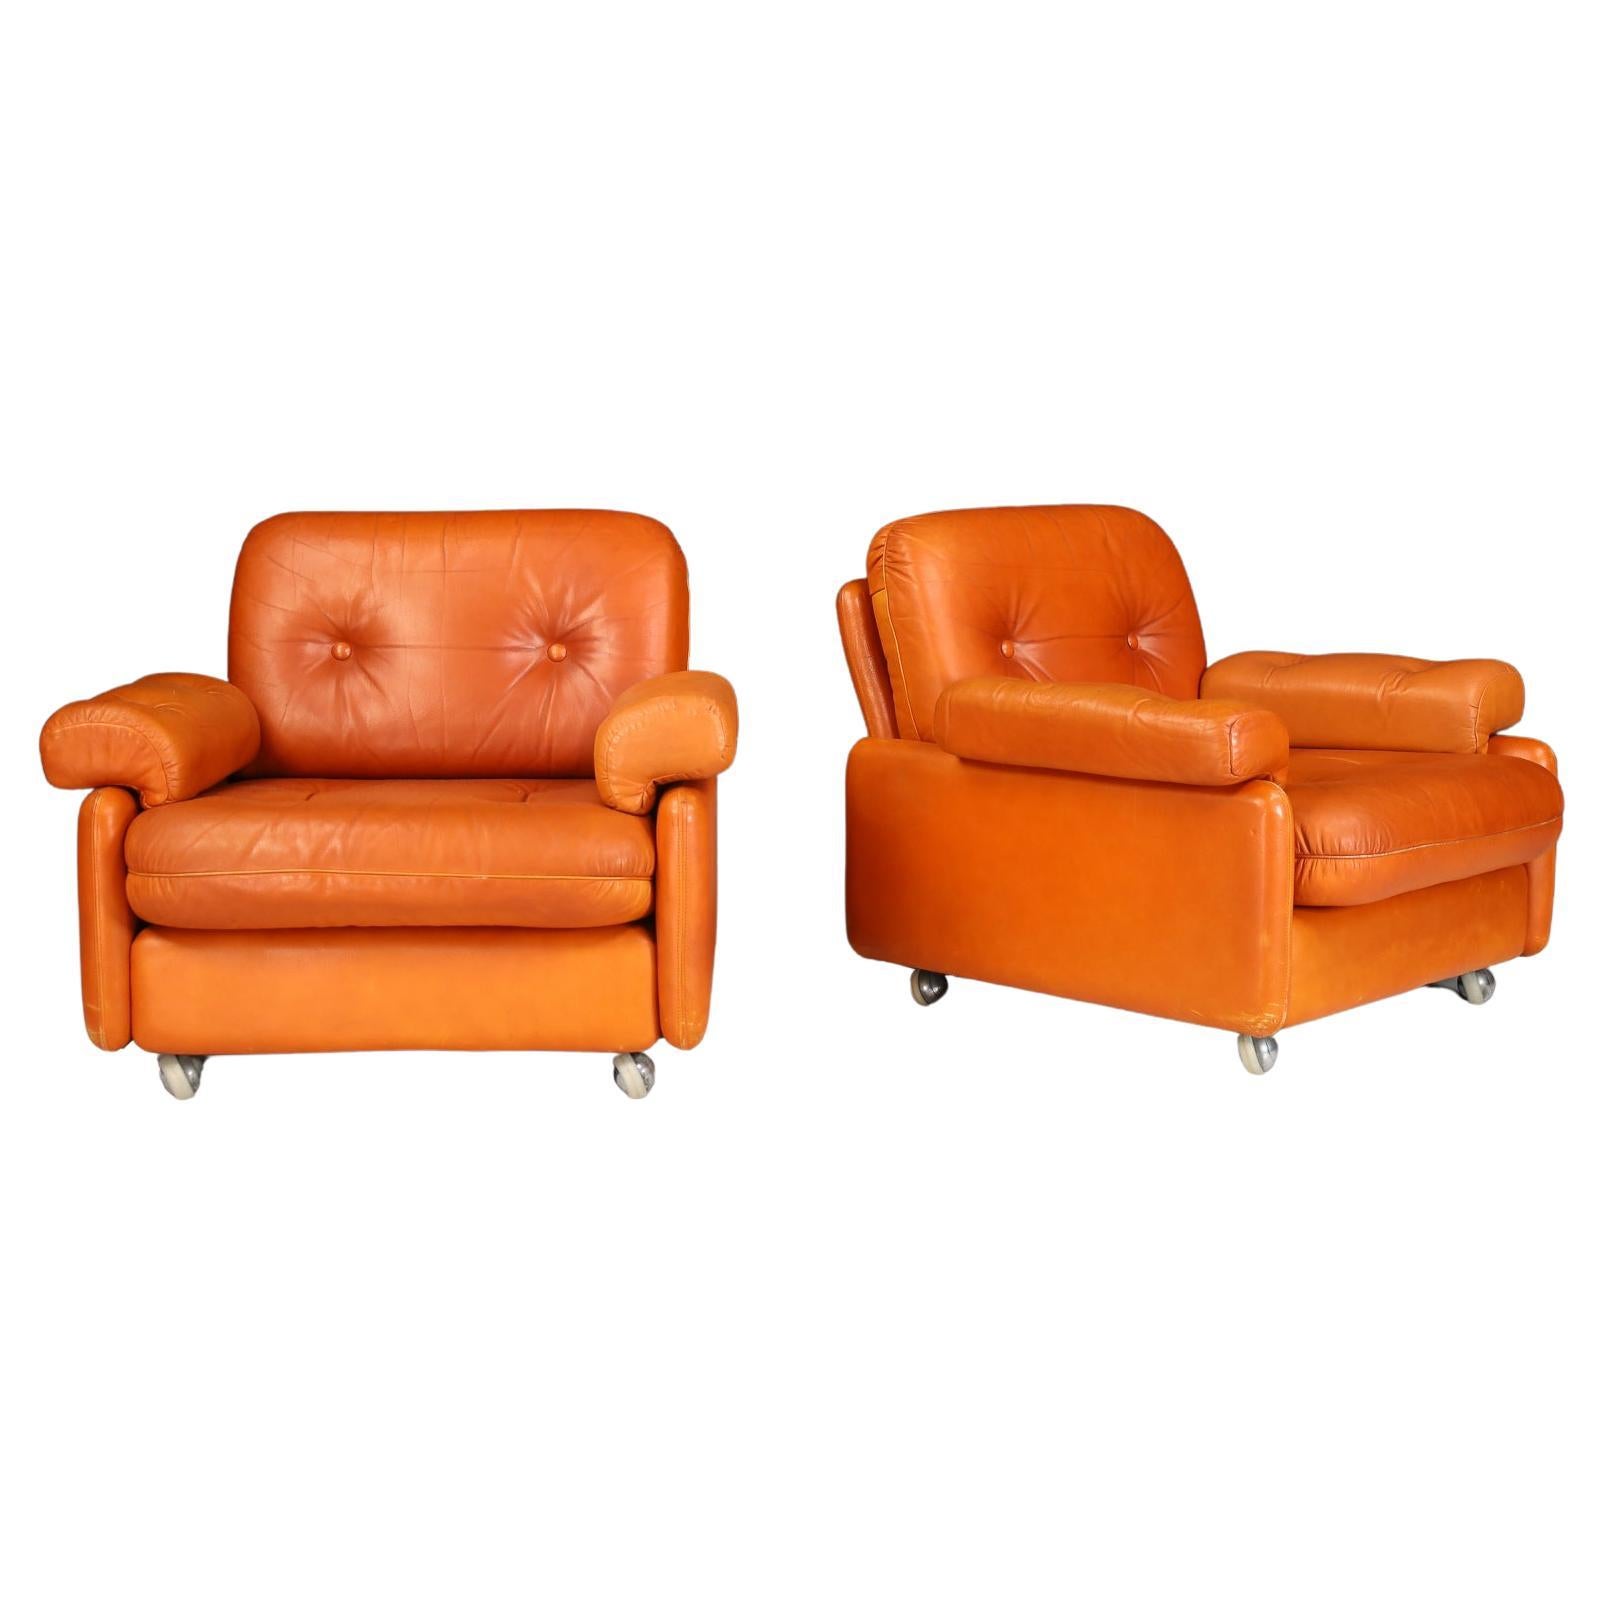 Set of Two Mid-Century Modern Leather Armchairs, Germany, 1960s For Sale